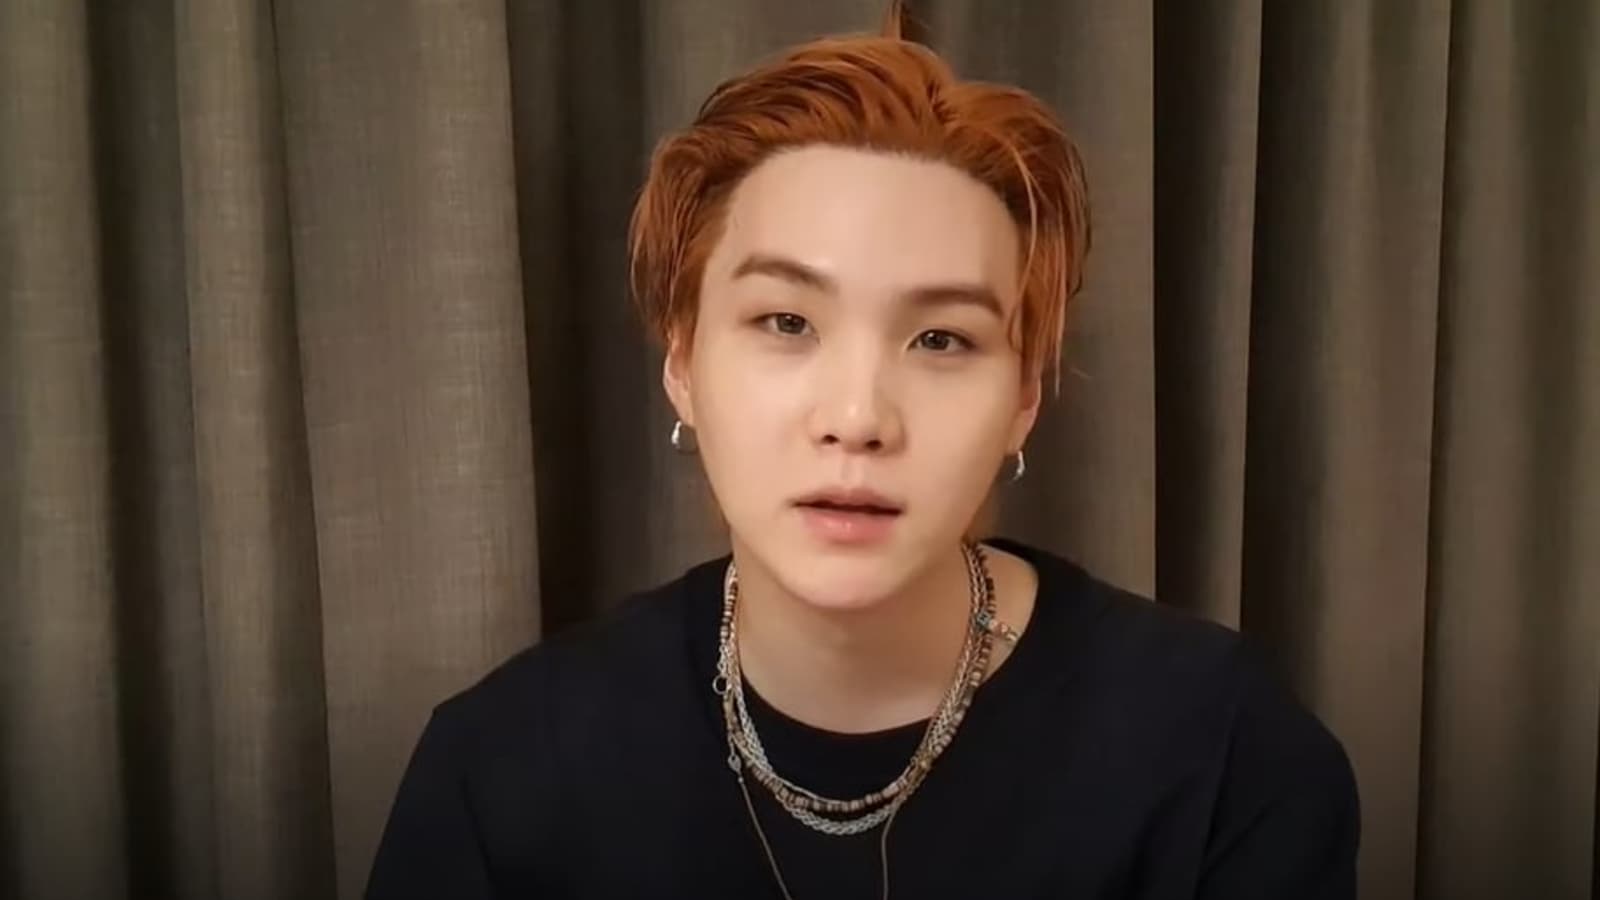 BTS's Suga Does The “What's In My Bag?” Challenge — Here Are His